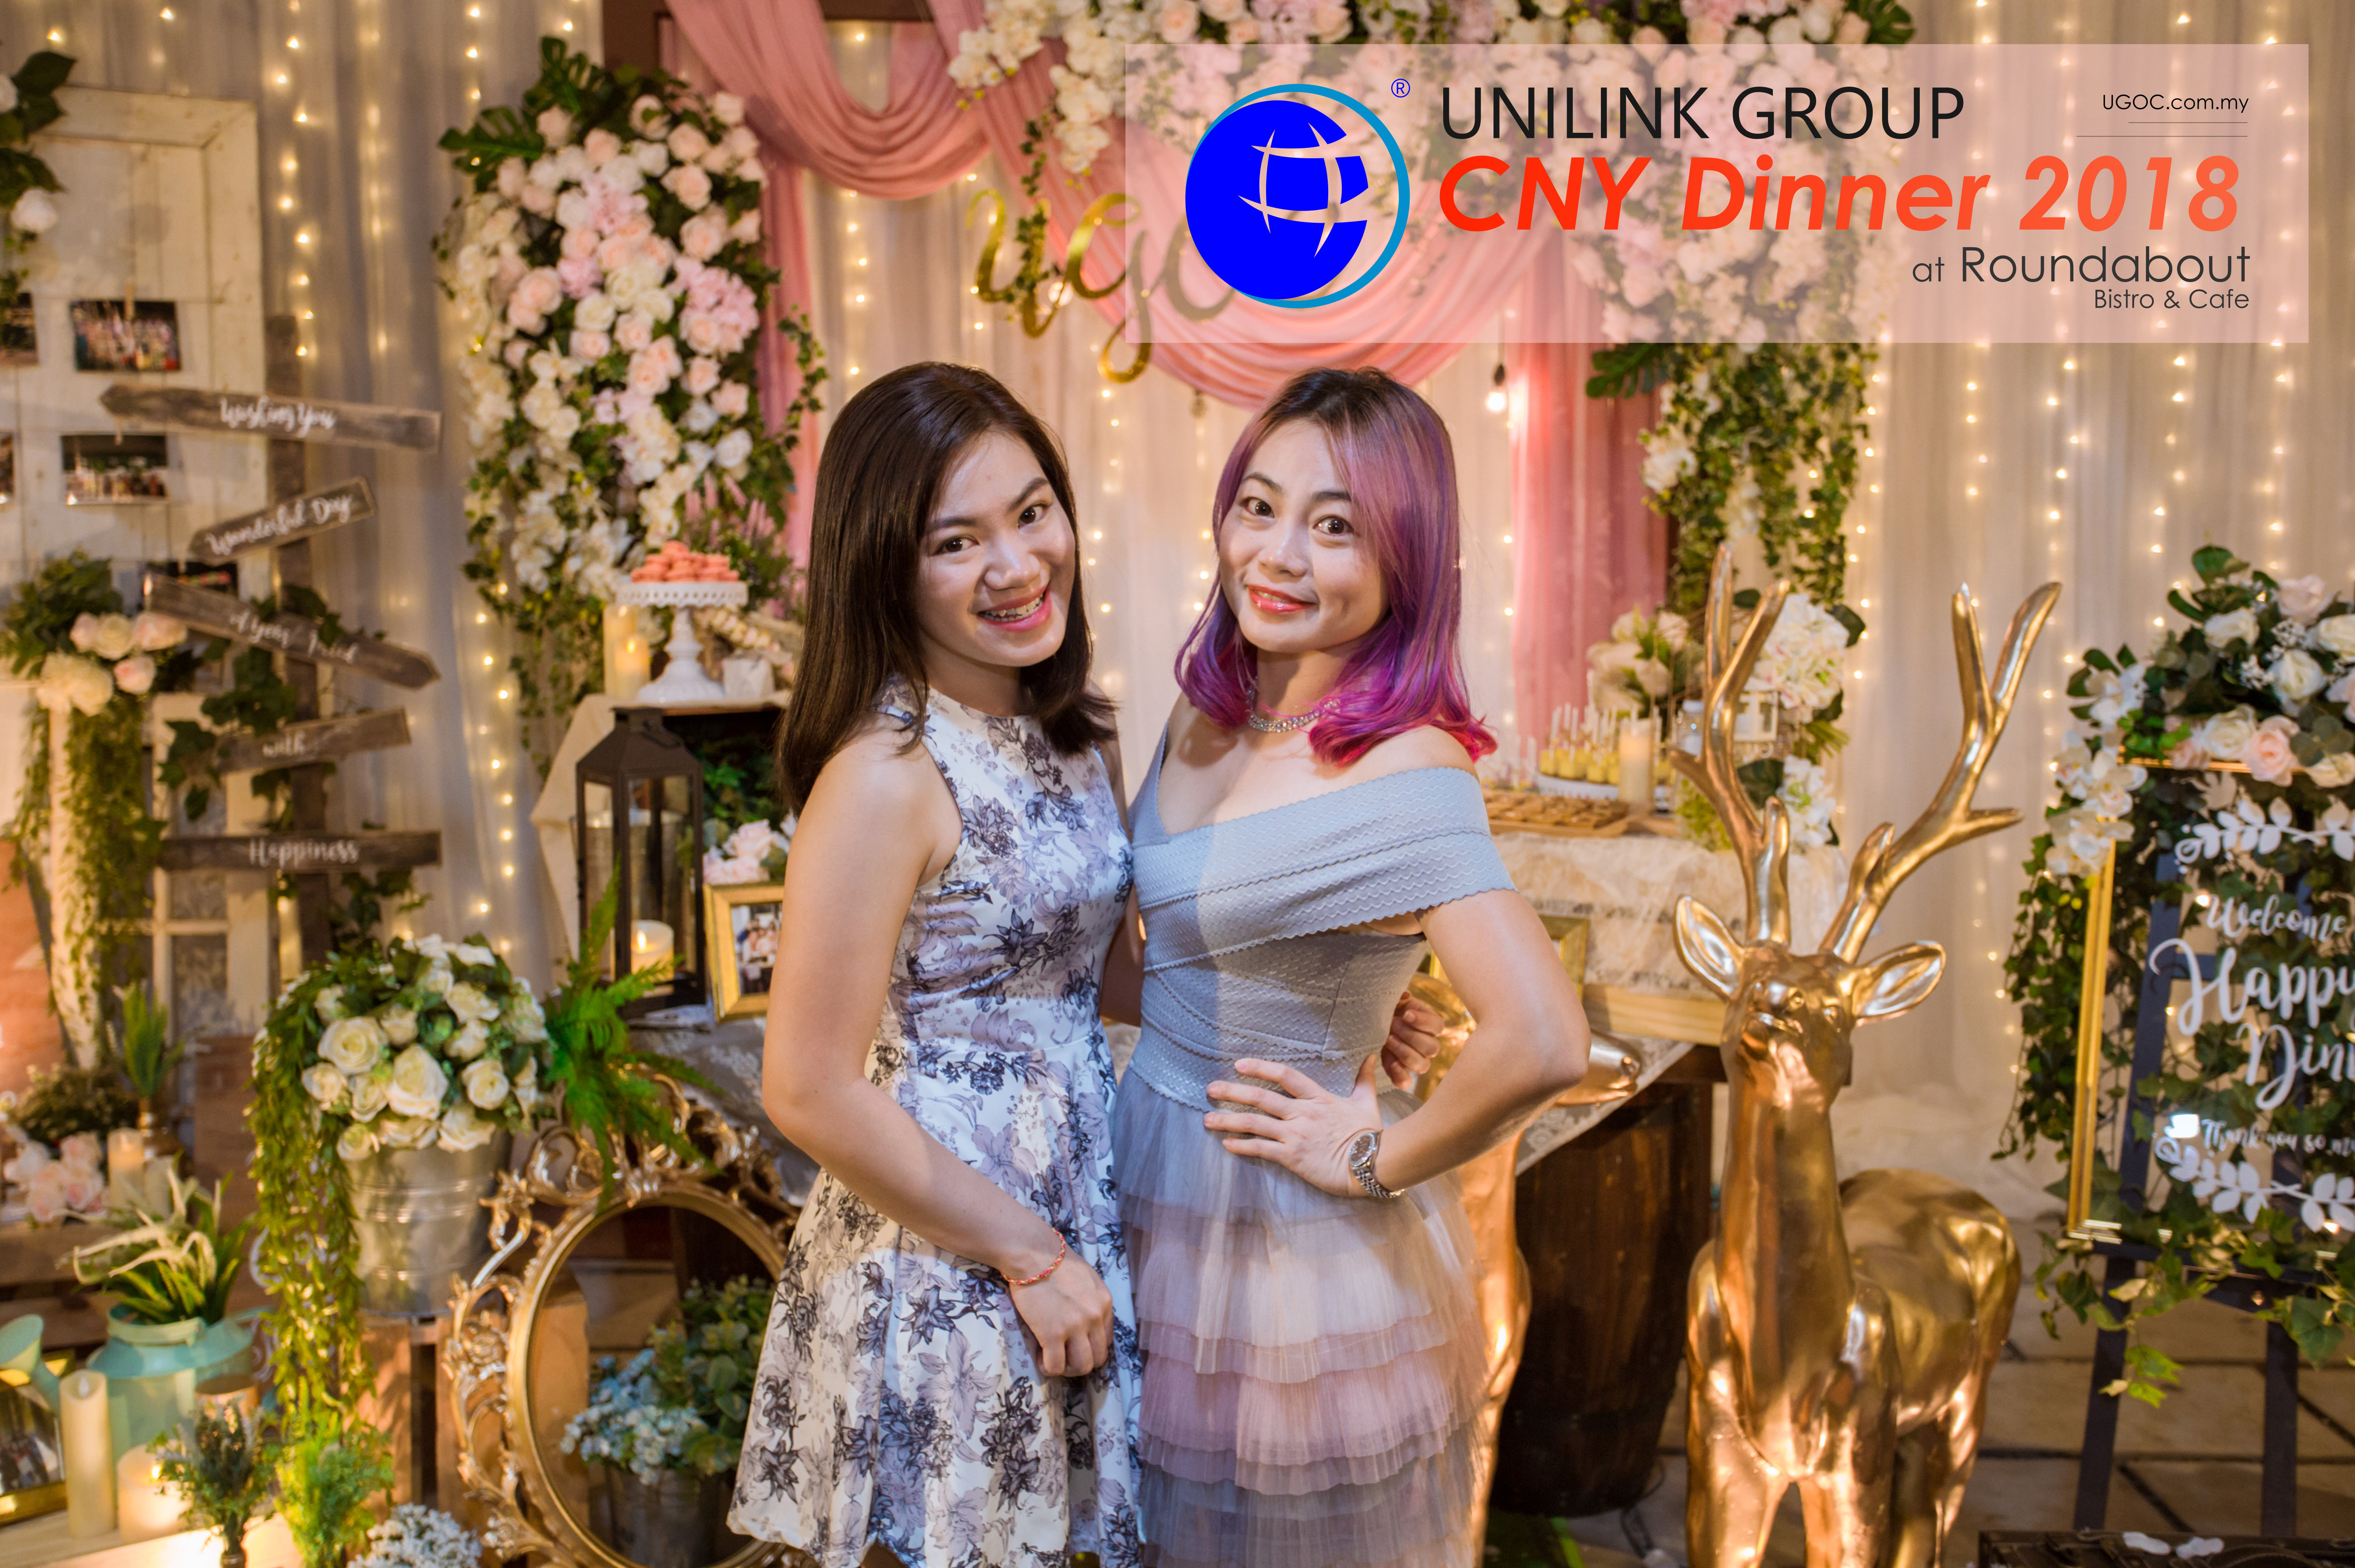 Unilink Group Chinese New Year Dinner 2018 from Agensi Pekerjaan Unilink Prospects Sdn Bhd at Roundabout Bisrto and Cafe 37